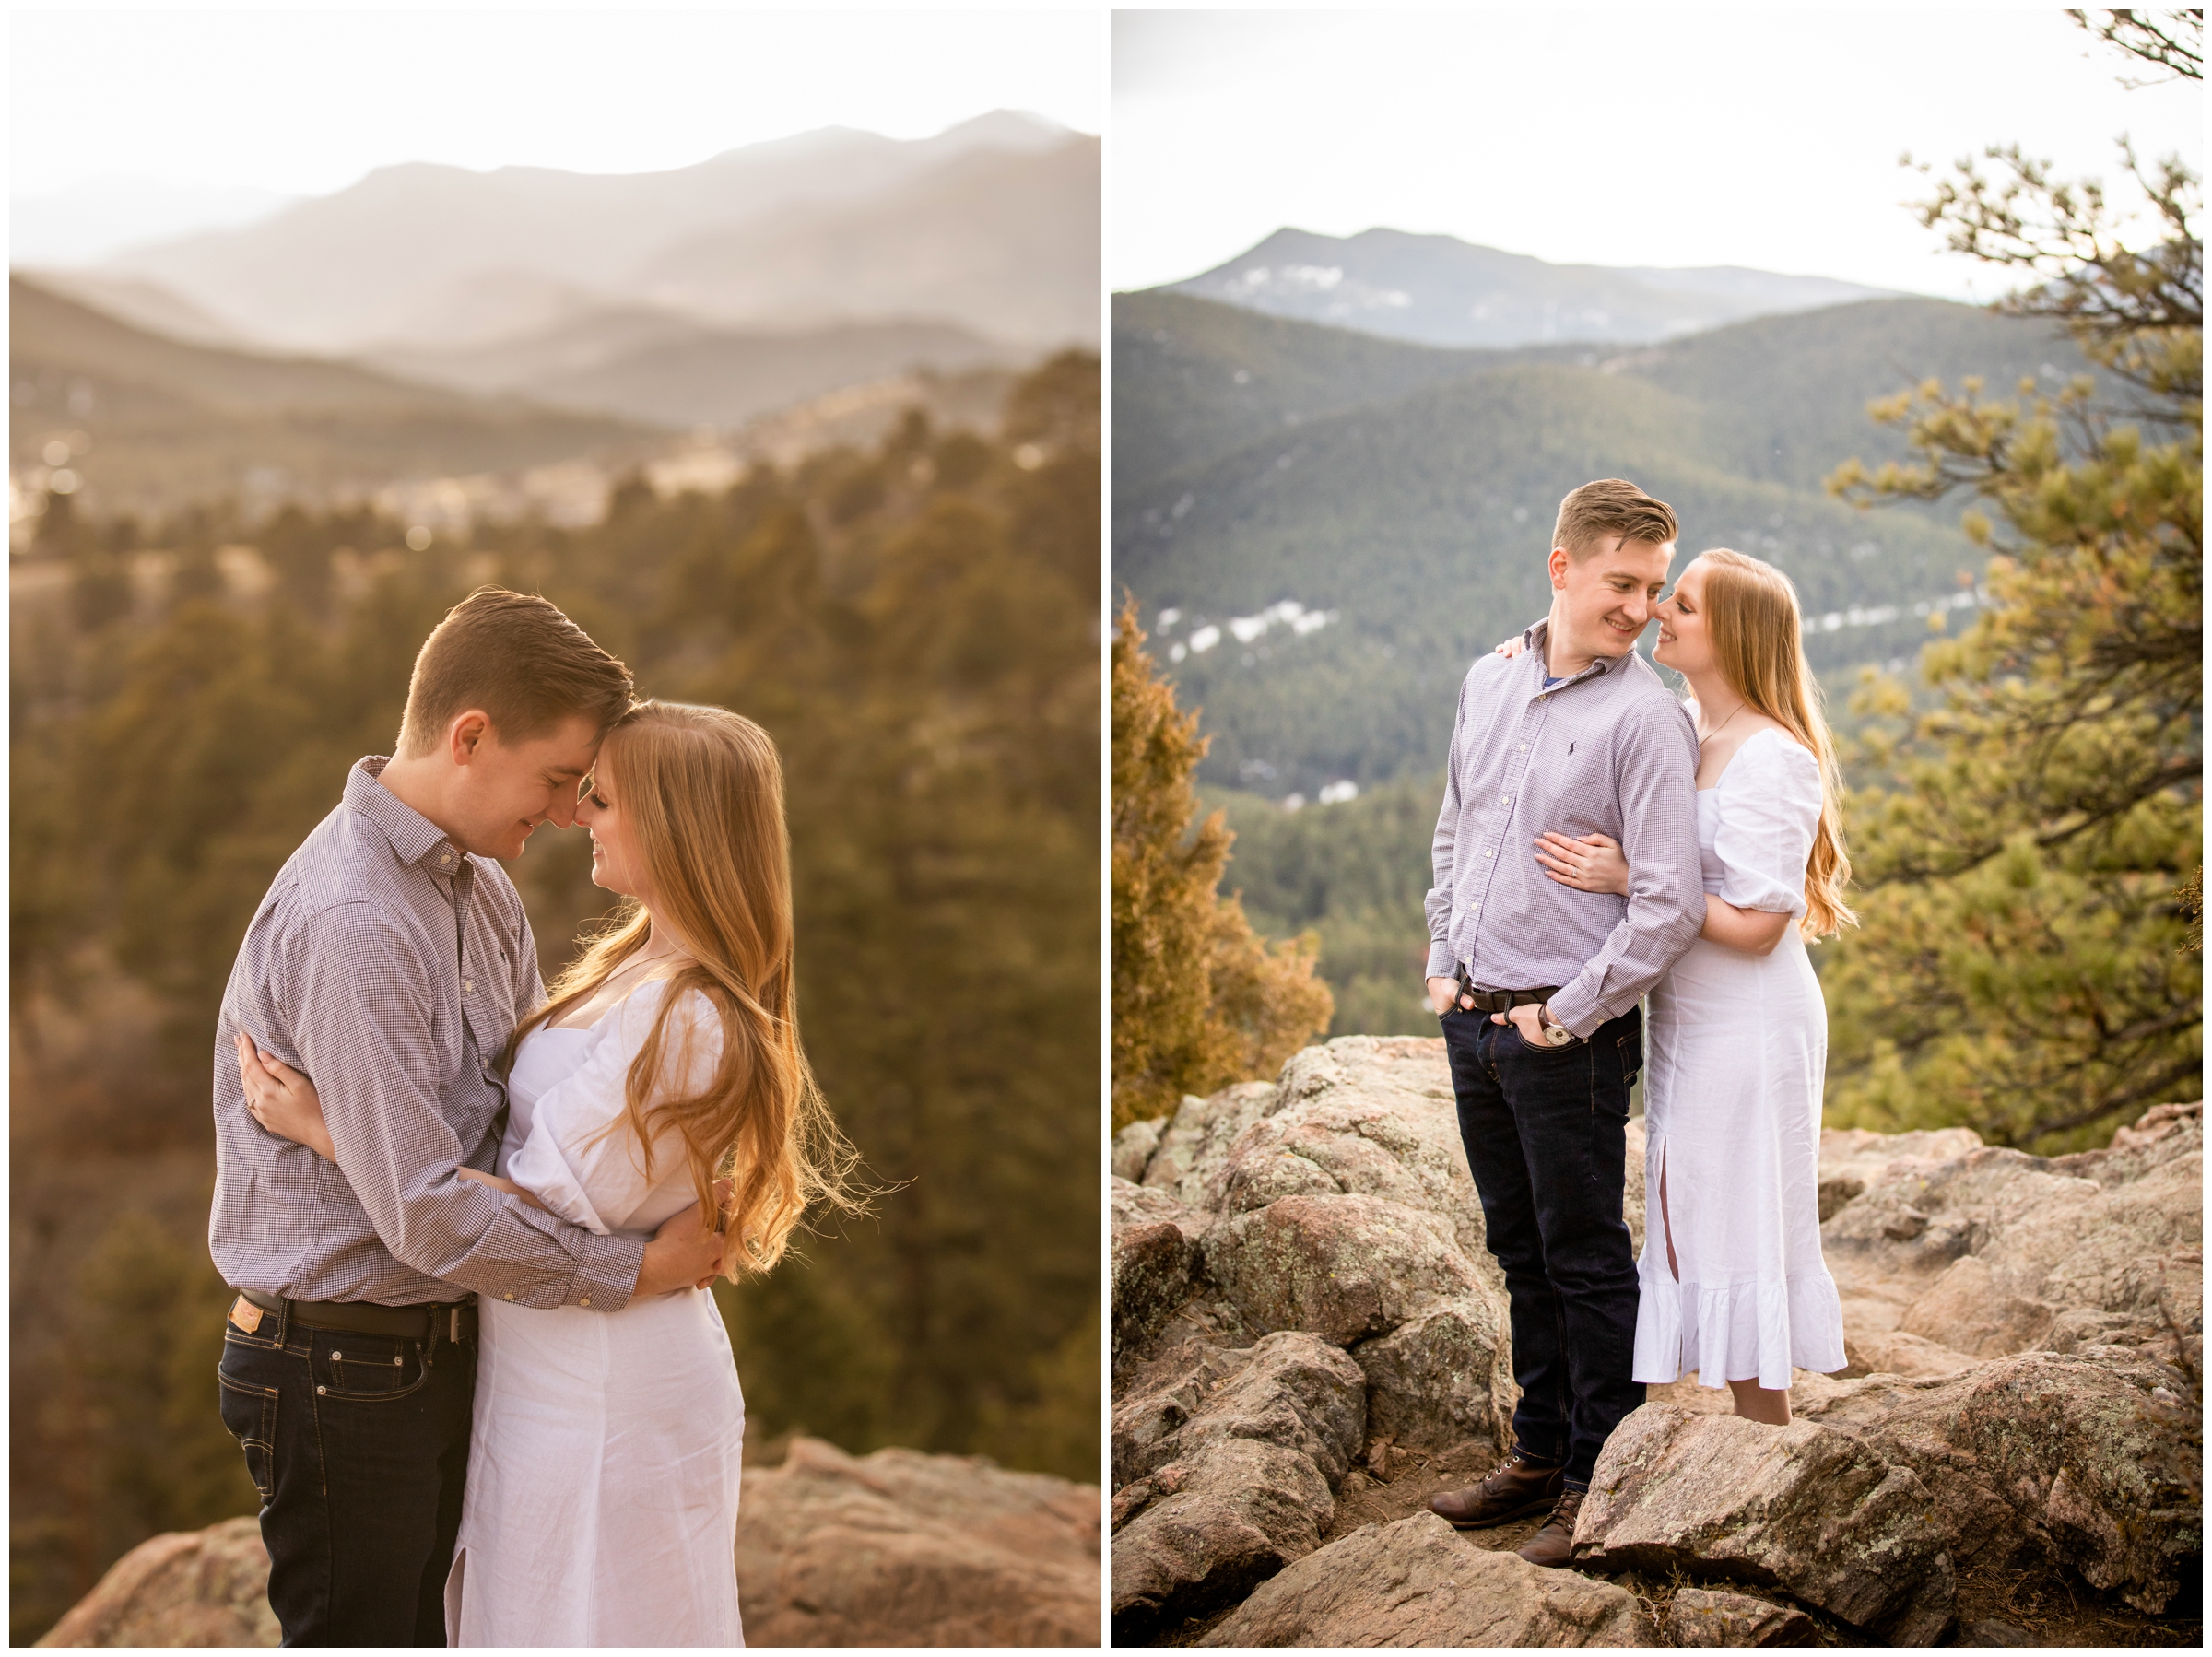 couple cuddling in the mountains at sunset during Colorado anniversary photo shoot by Plum Pretty Photography